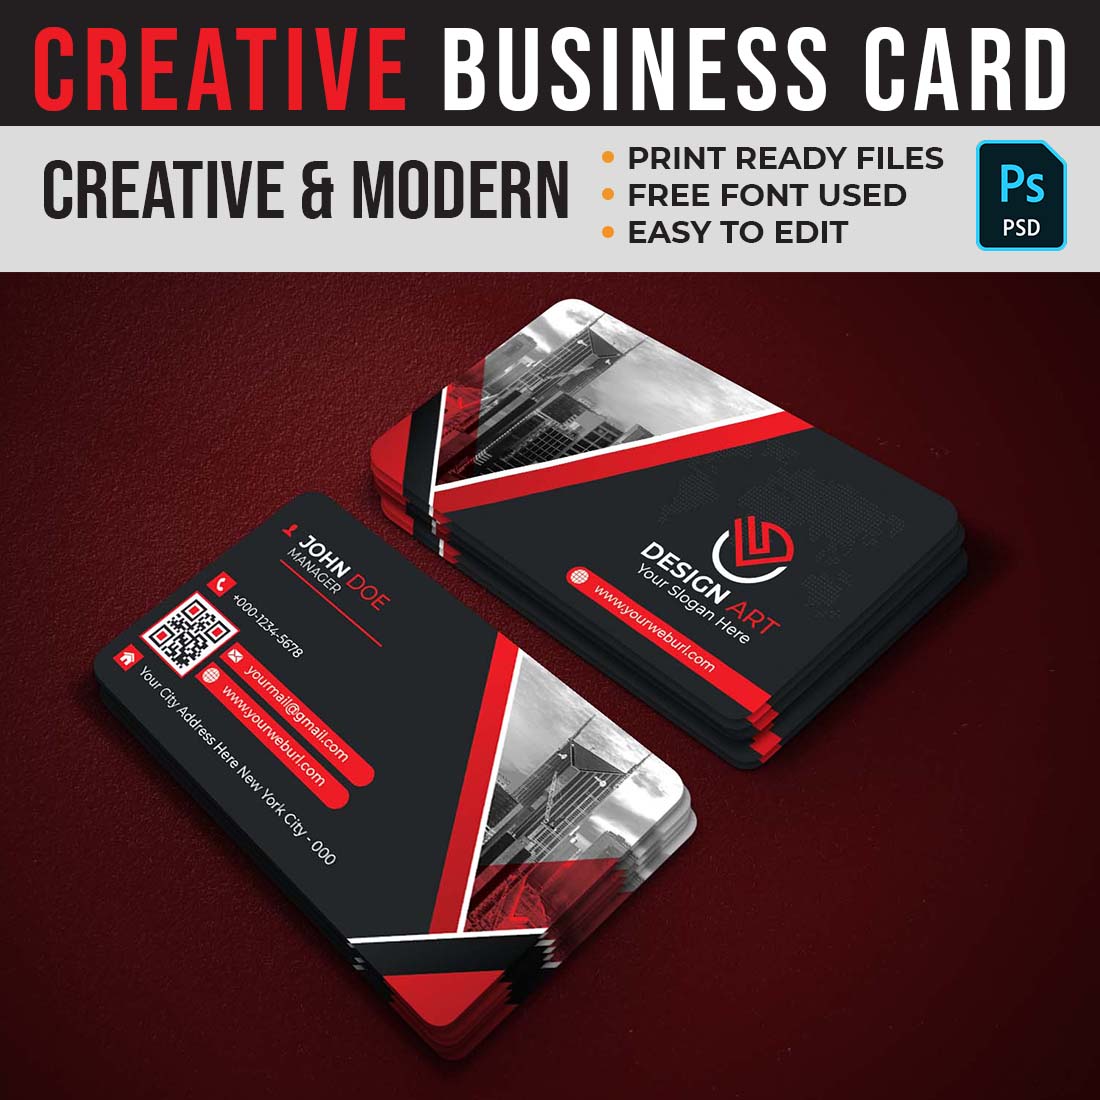 Modern Creative And Professional Business Card Template cover image.